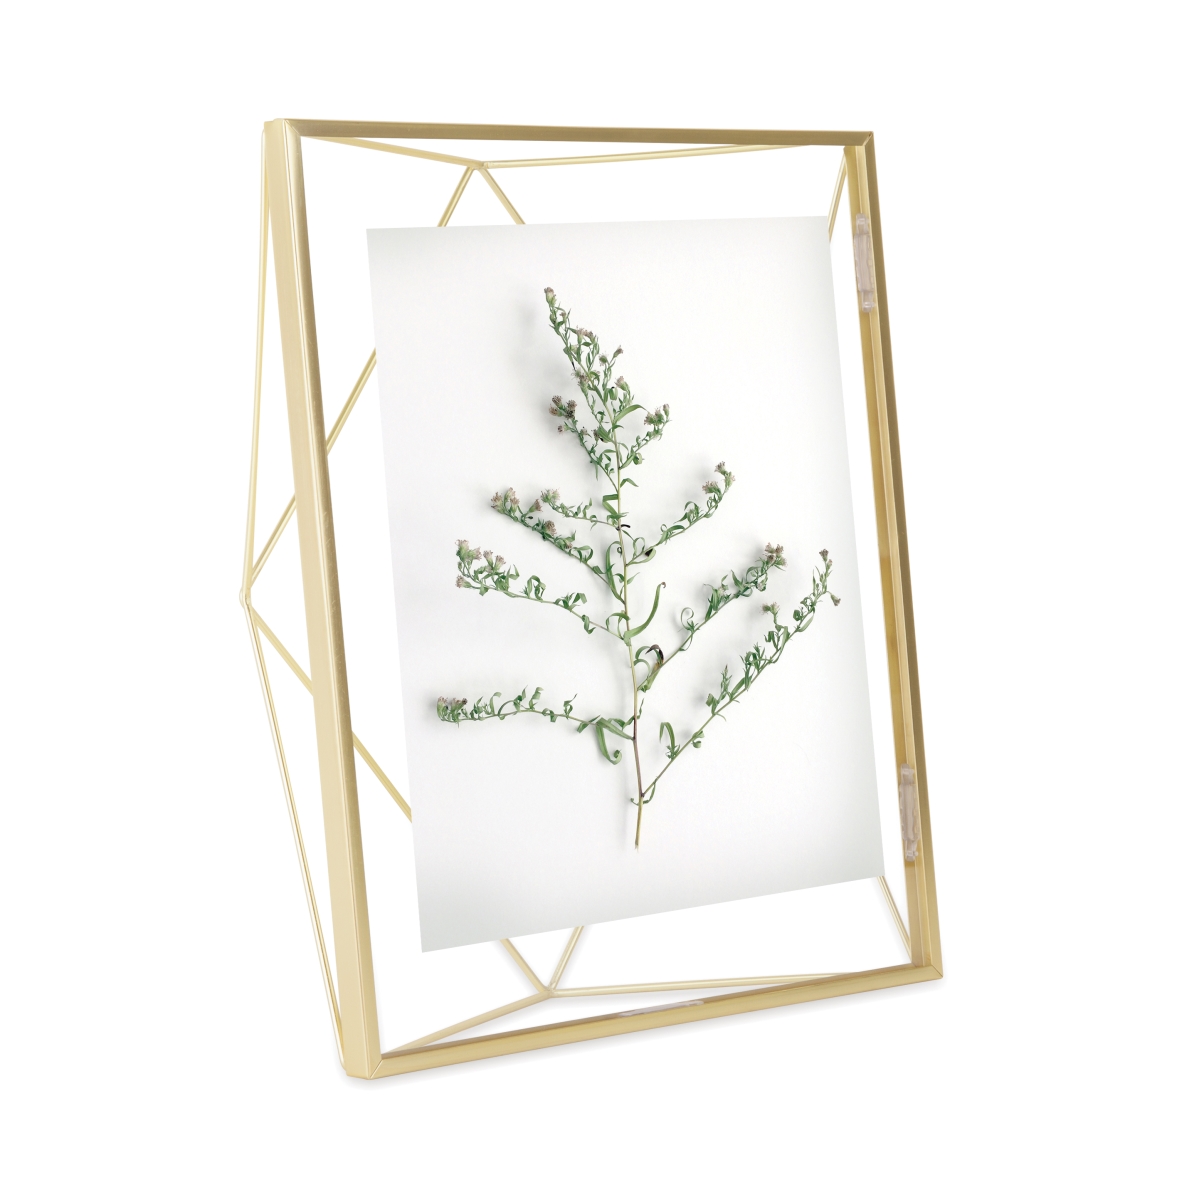 313018-221 8 X 10 In. Prisma Picture Frame Floating Wall Or Desk Photo Display - Matte Brass